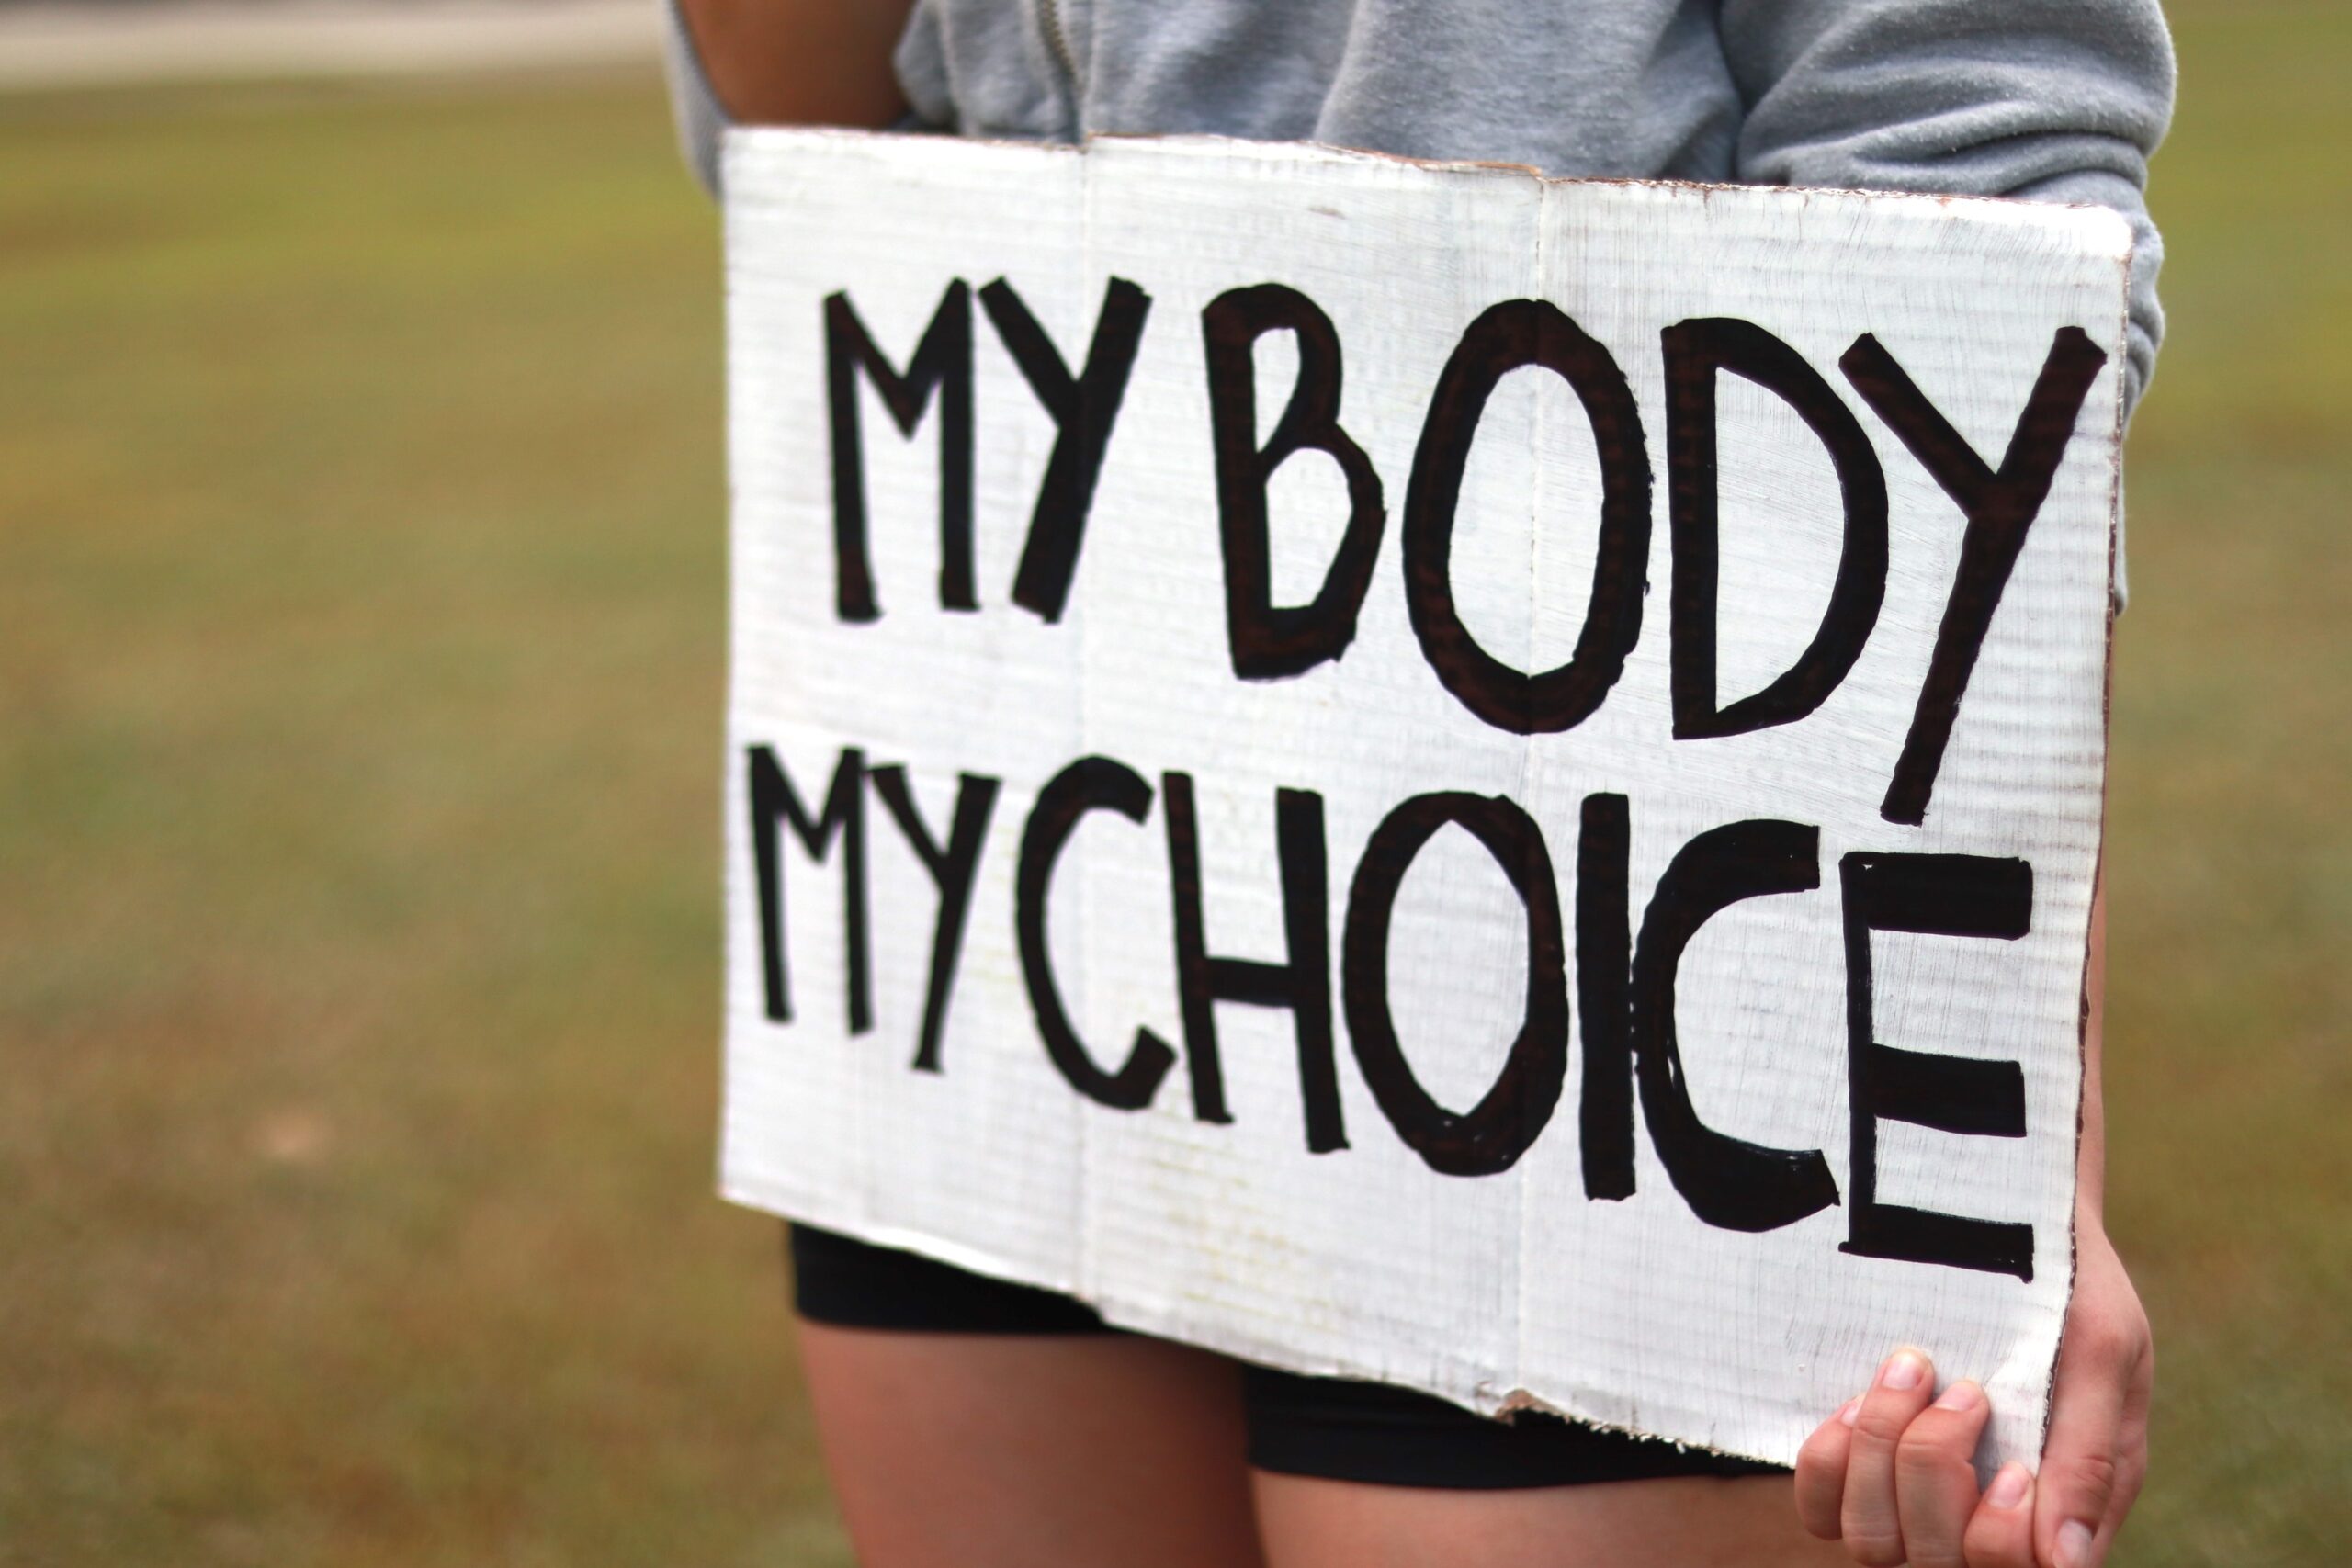 The fight for abortion rights in the US